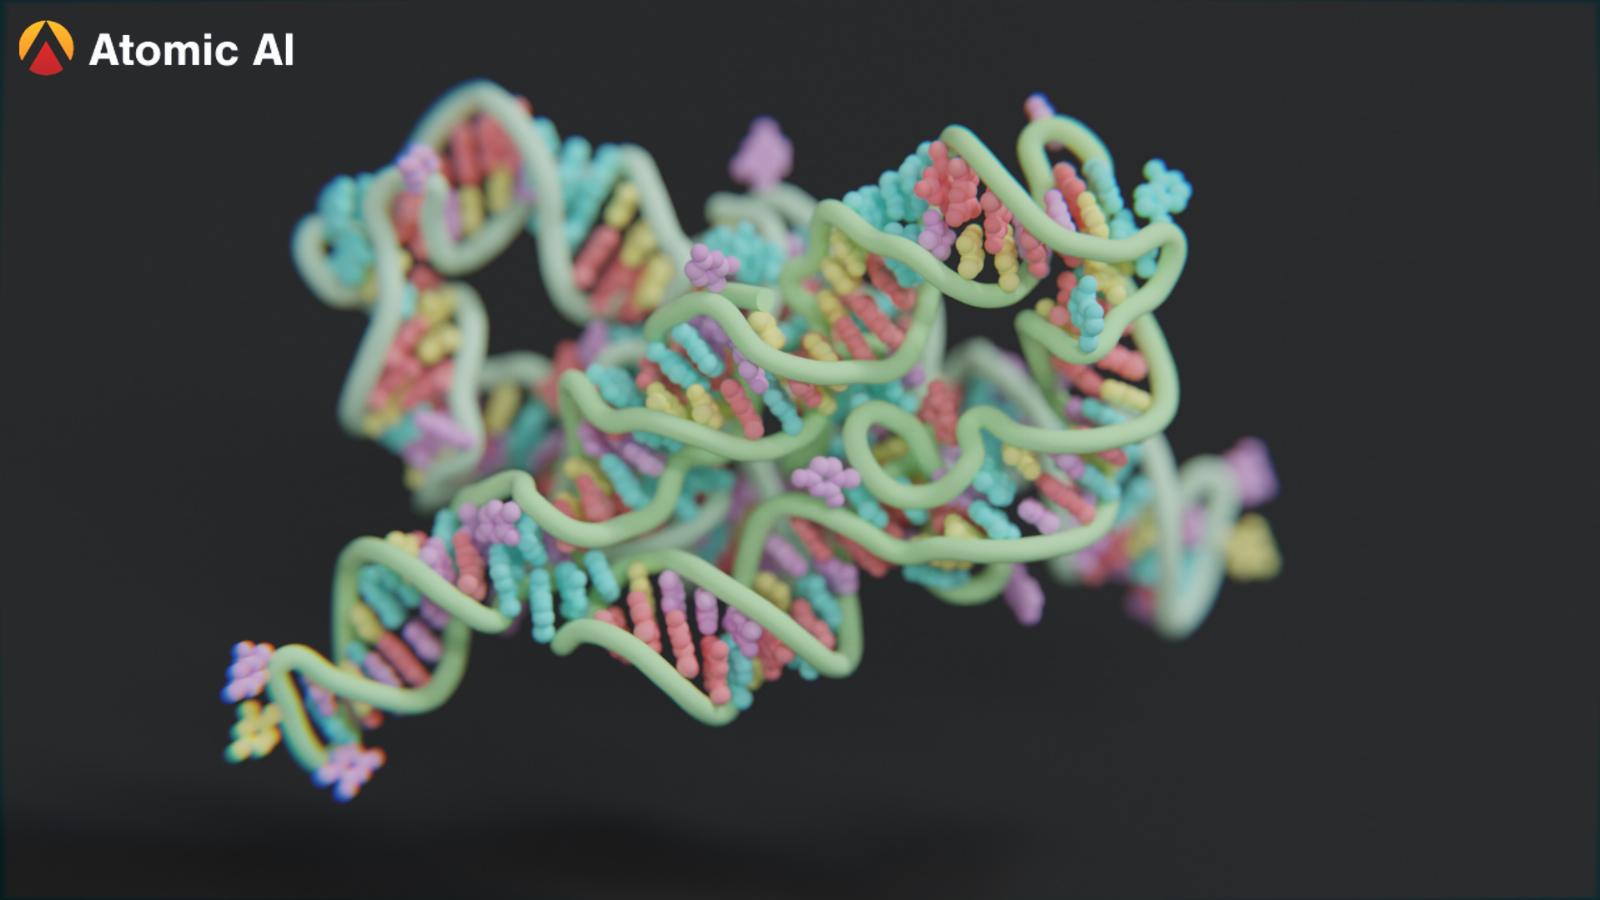 With new funding, Atomic AI envisions RNA as the next frontier in drug discovery